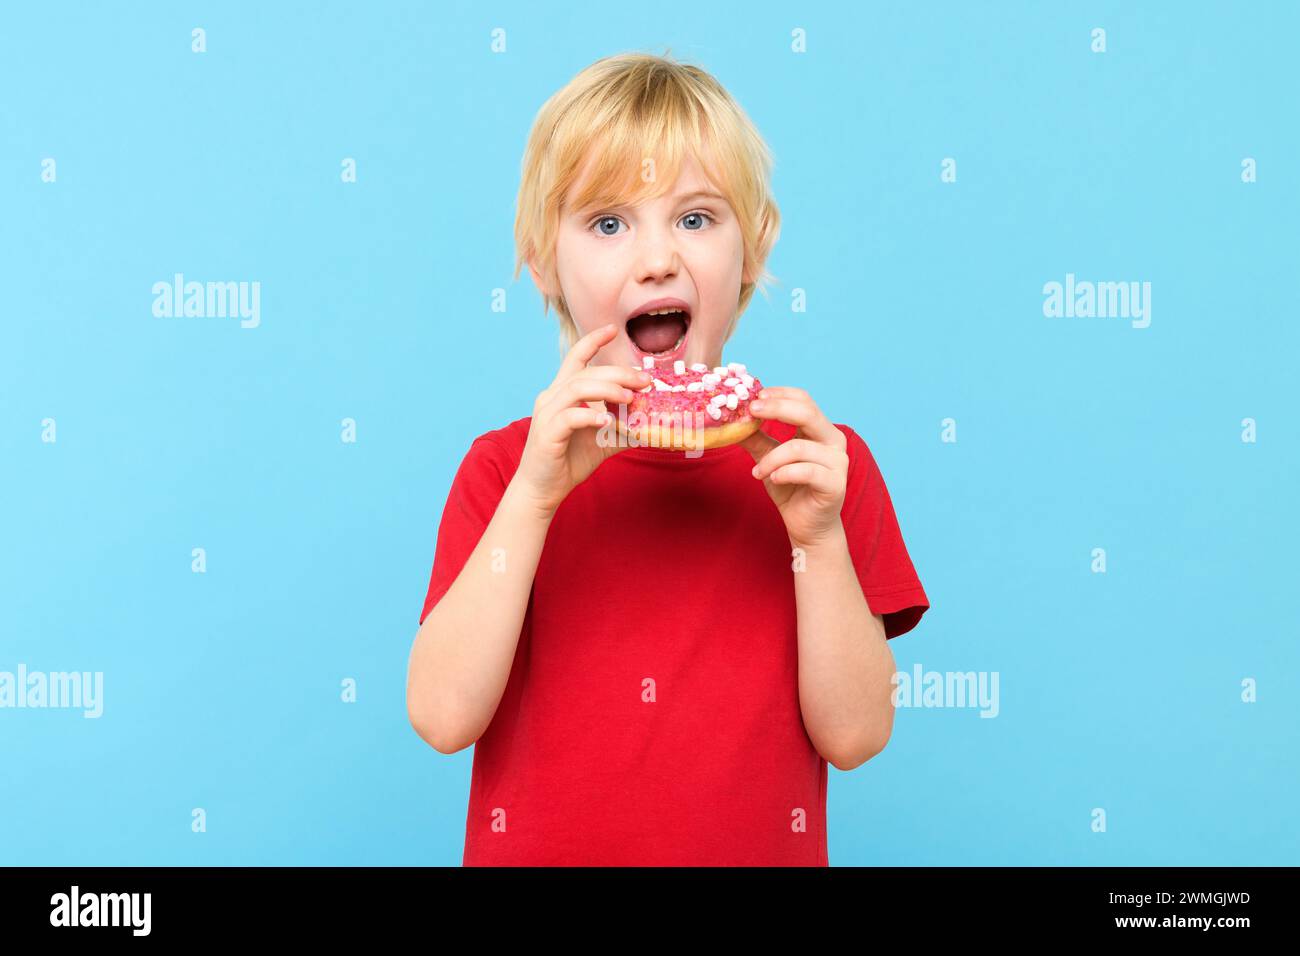 Cute little boy with blond hair and freckles eating a glazed donut. Children and sugary junk food concept. Boy holding colorful donuts, eating junk un Stock Photo